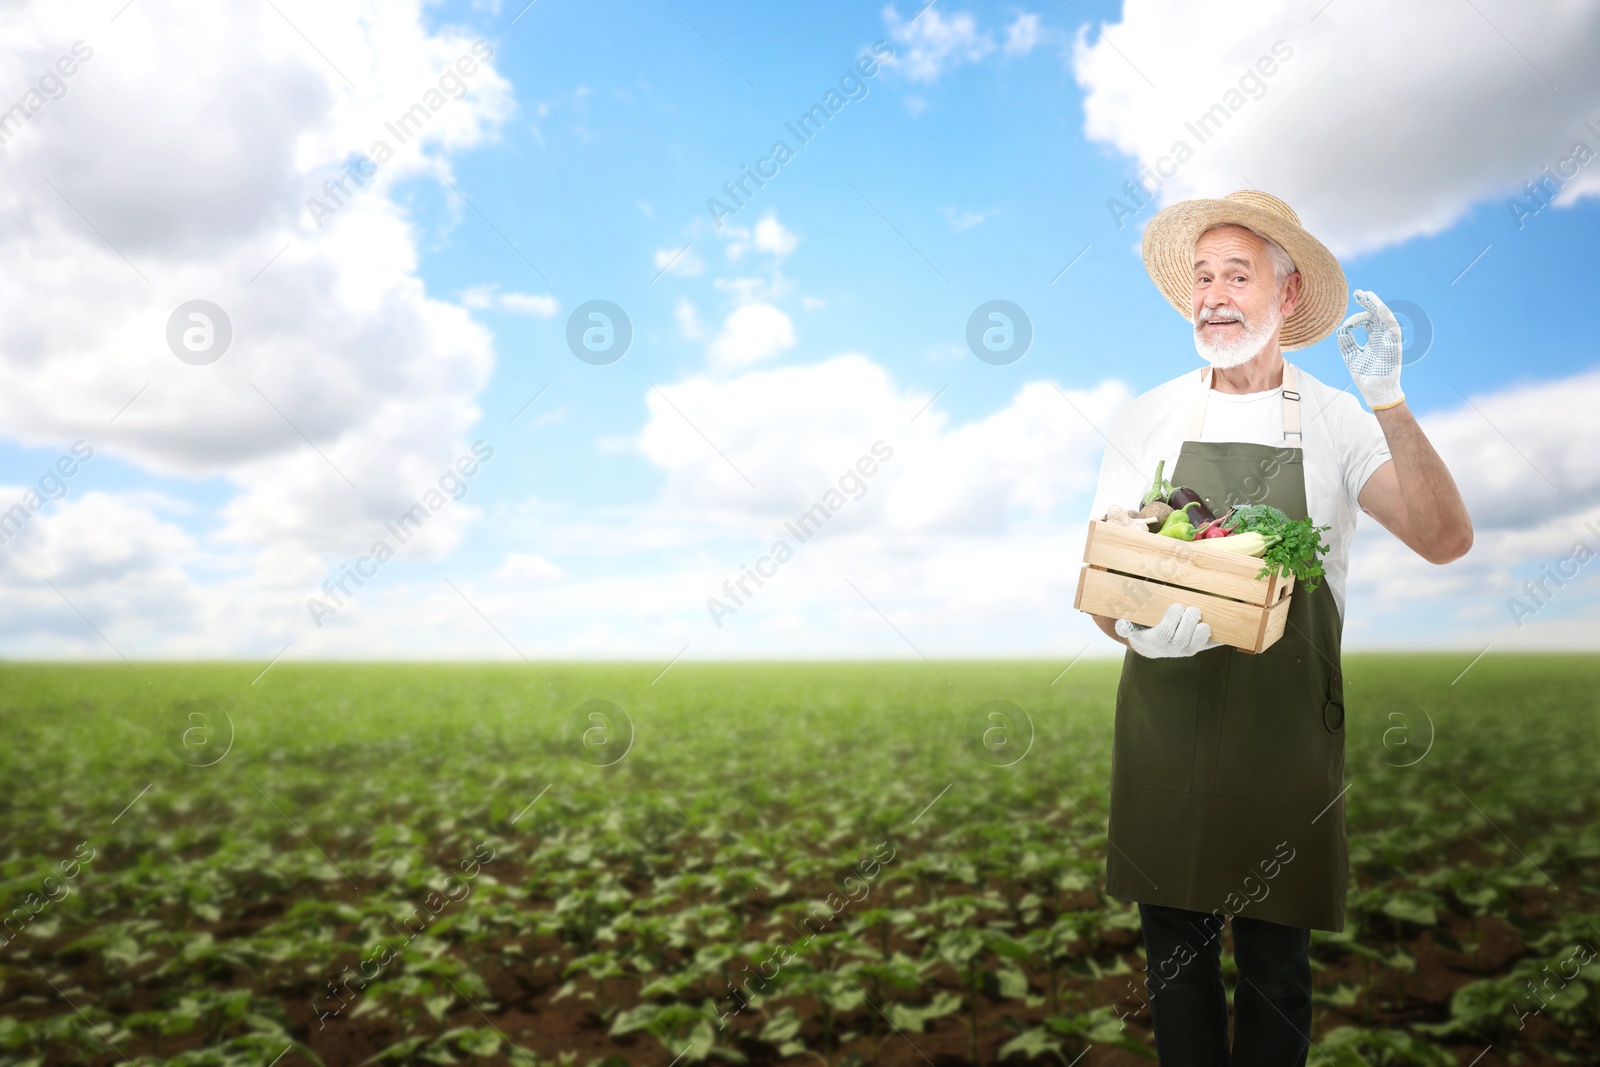 Image of Harvesting season. Farmer holding wooden crate with crop and showing ok gesture in field